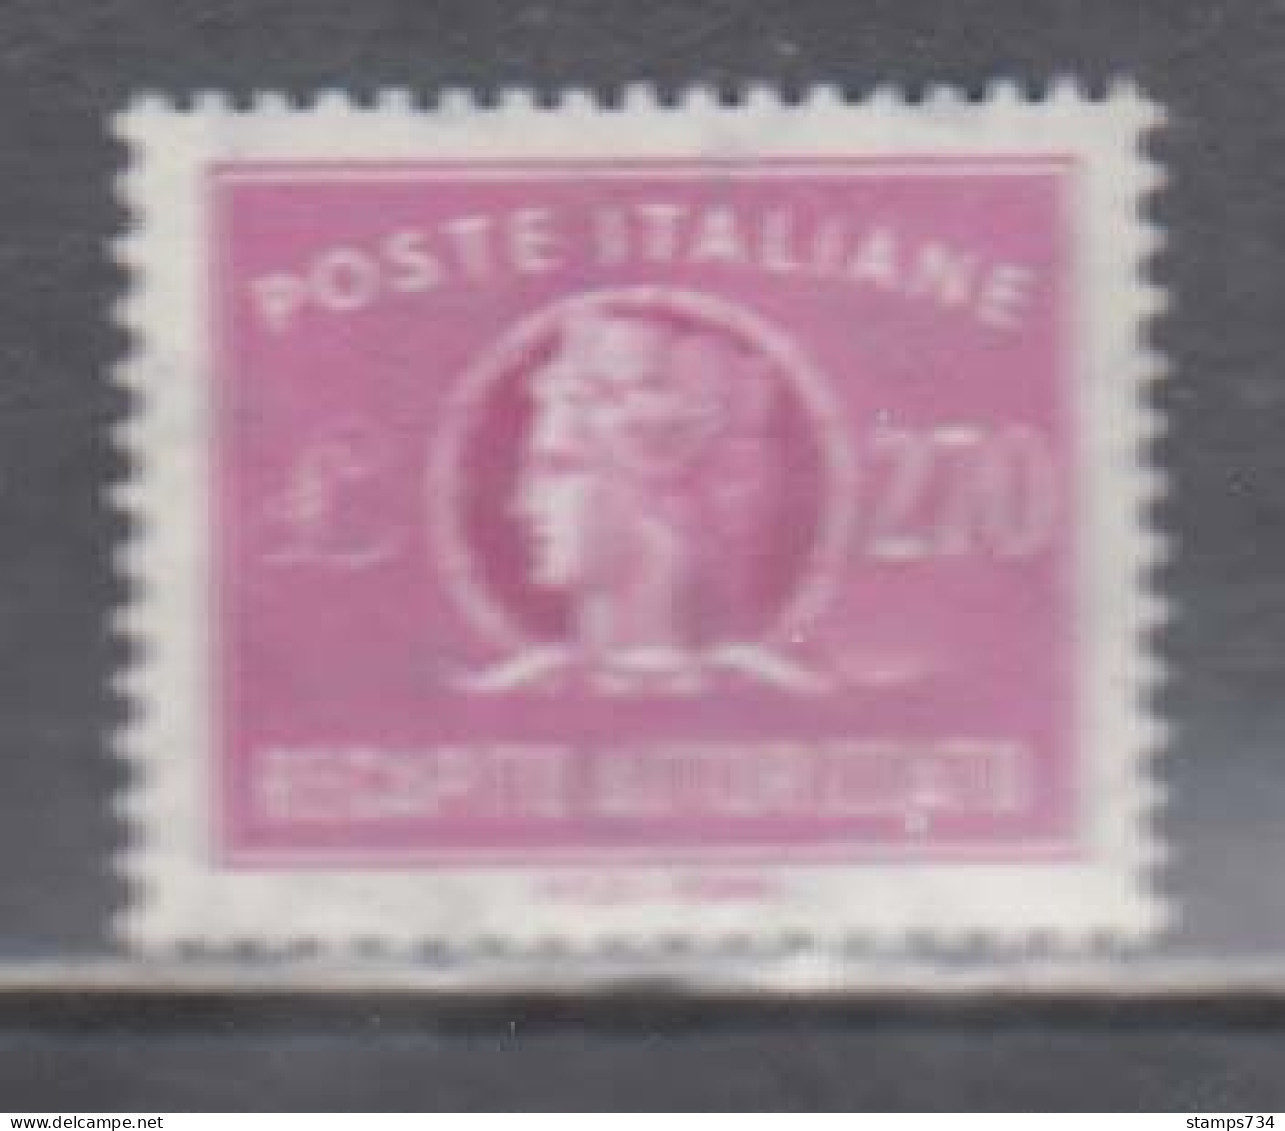 Italy 1987 - Consigned Parcels, Mi-Nr. 15, MNH** - Concessiepaketten